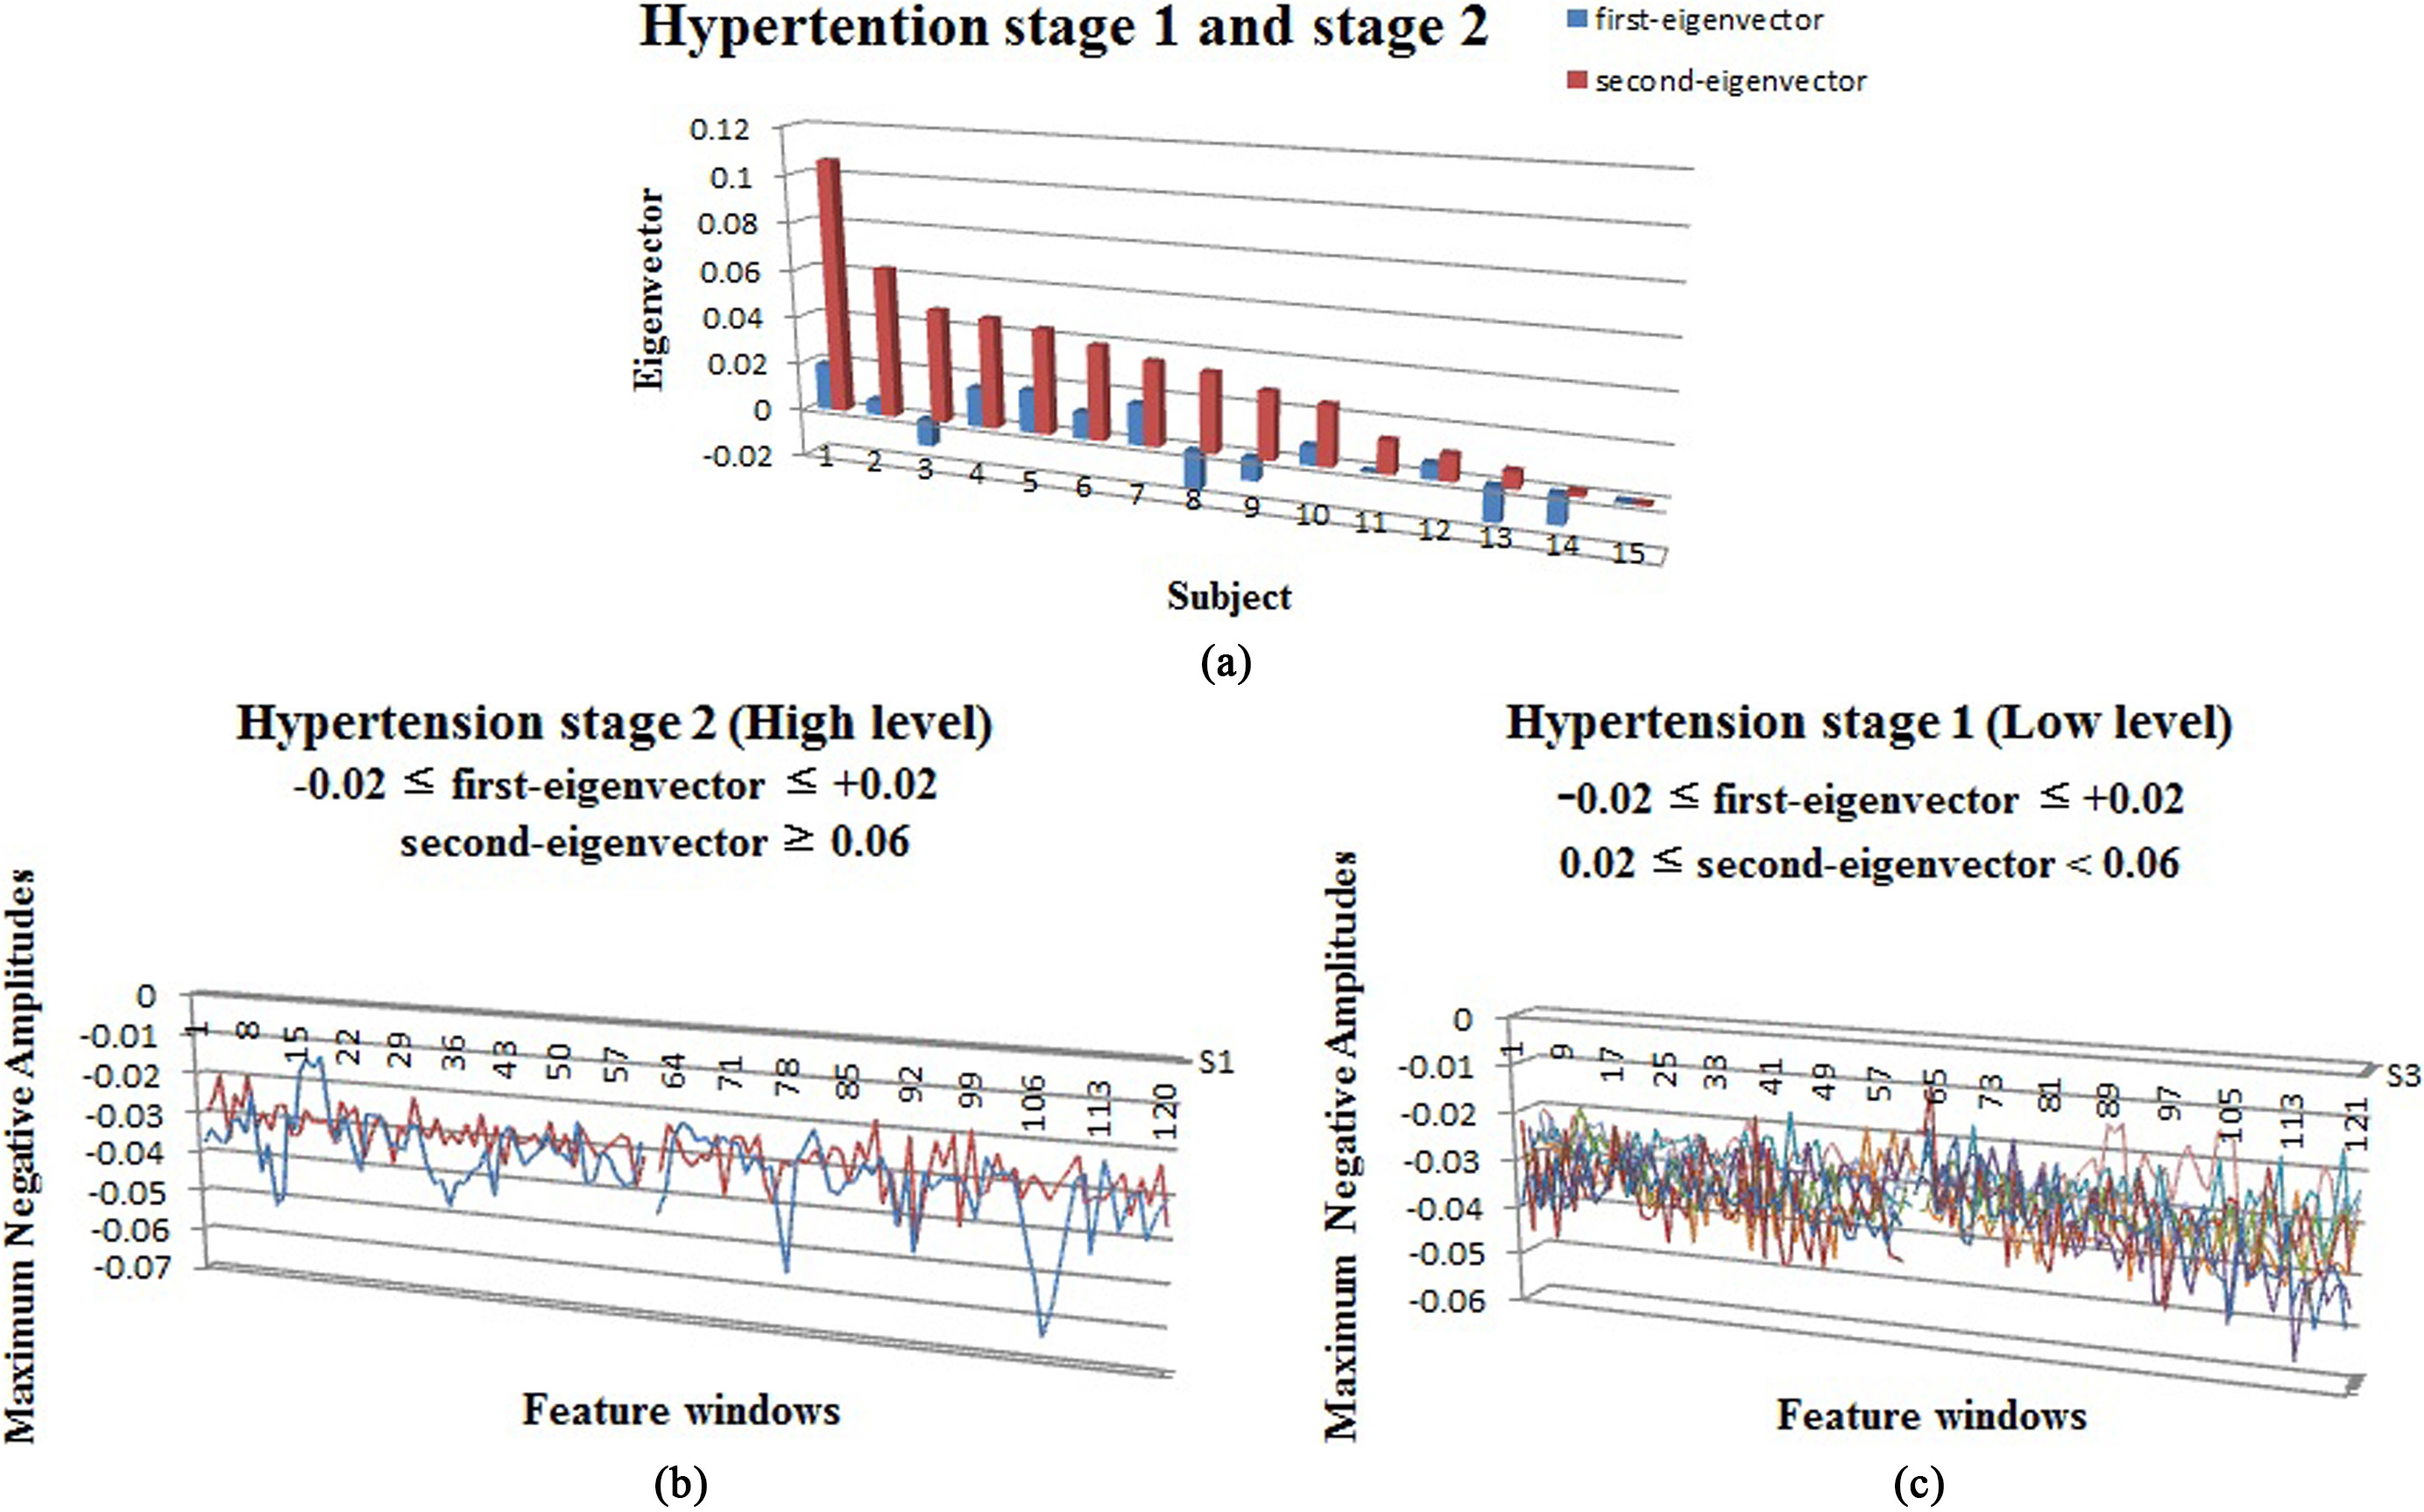 a. Analysis of first-eigenvector and second-eigenvector of hypertension stages 1 and 2; b. MLA waveform distribution of hypertension stage 2; c. MLA waveform distribution of hypertension stage 1.